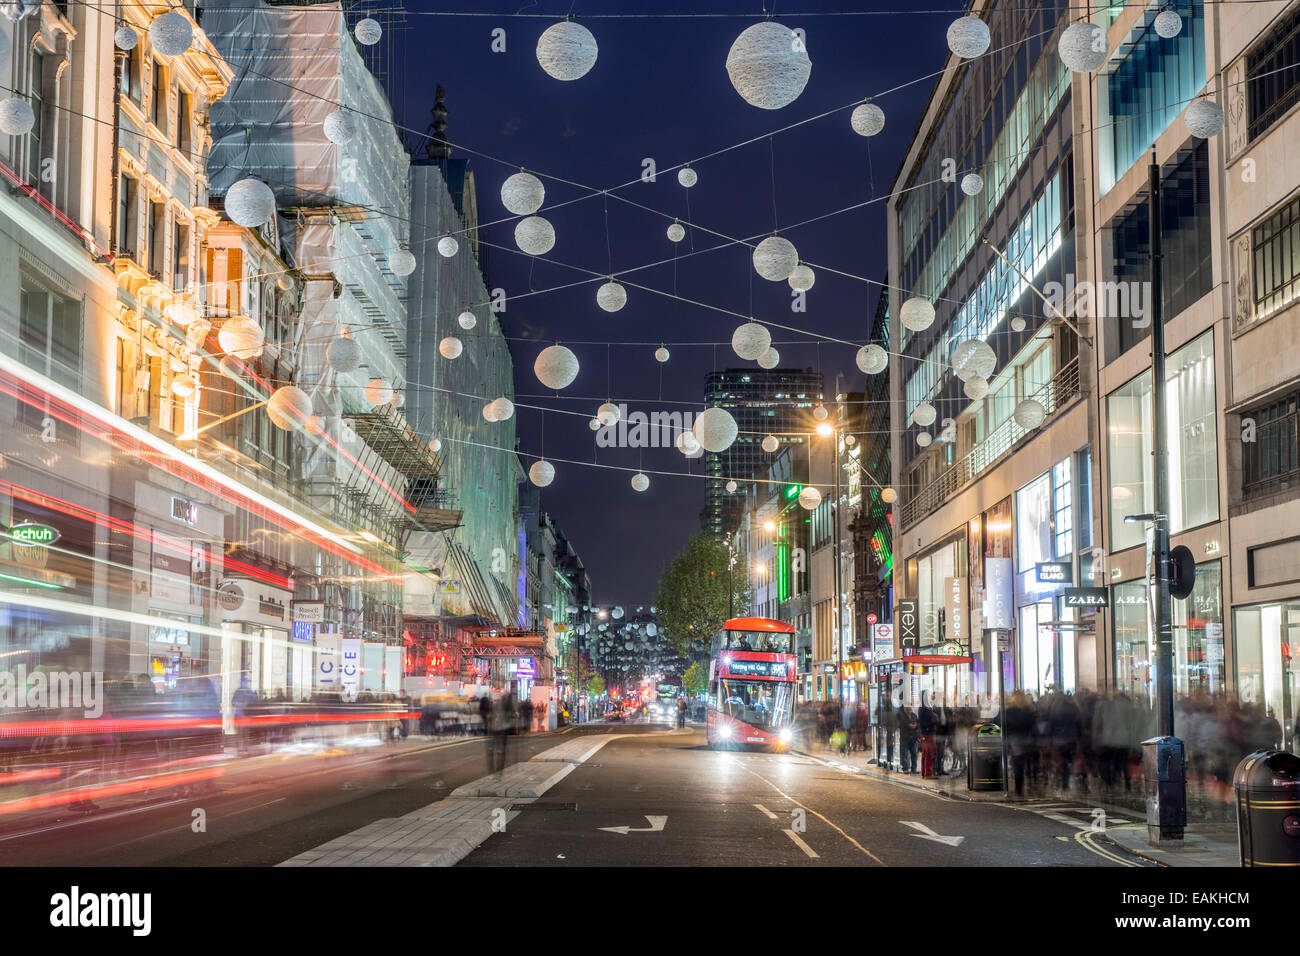 Oxford Street London Christmas decorations Banque D'Images